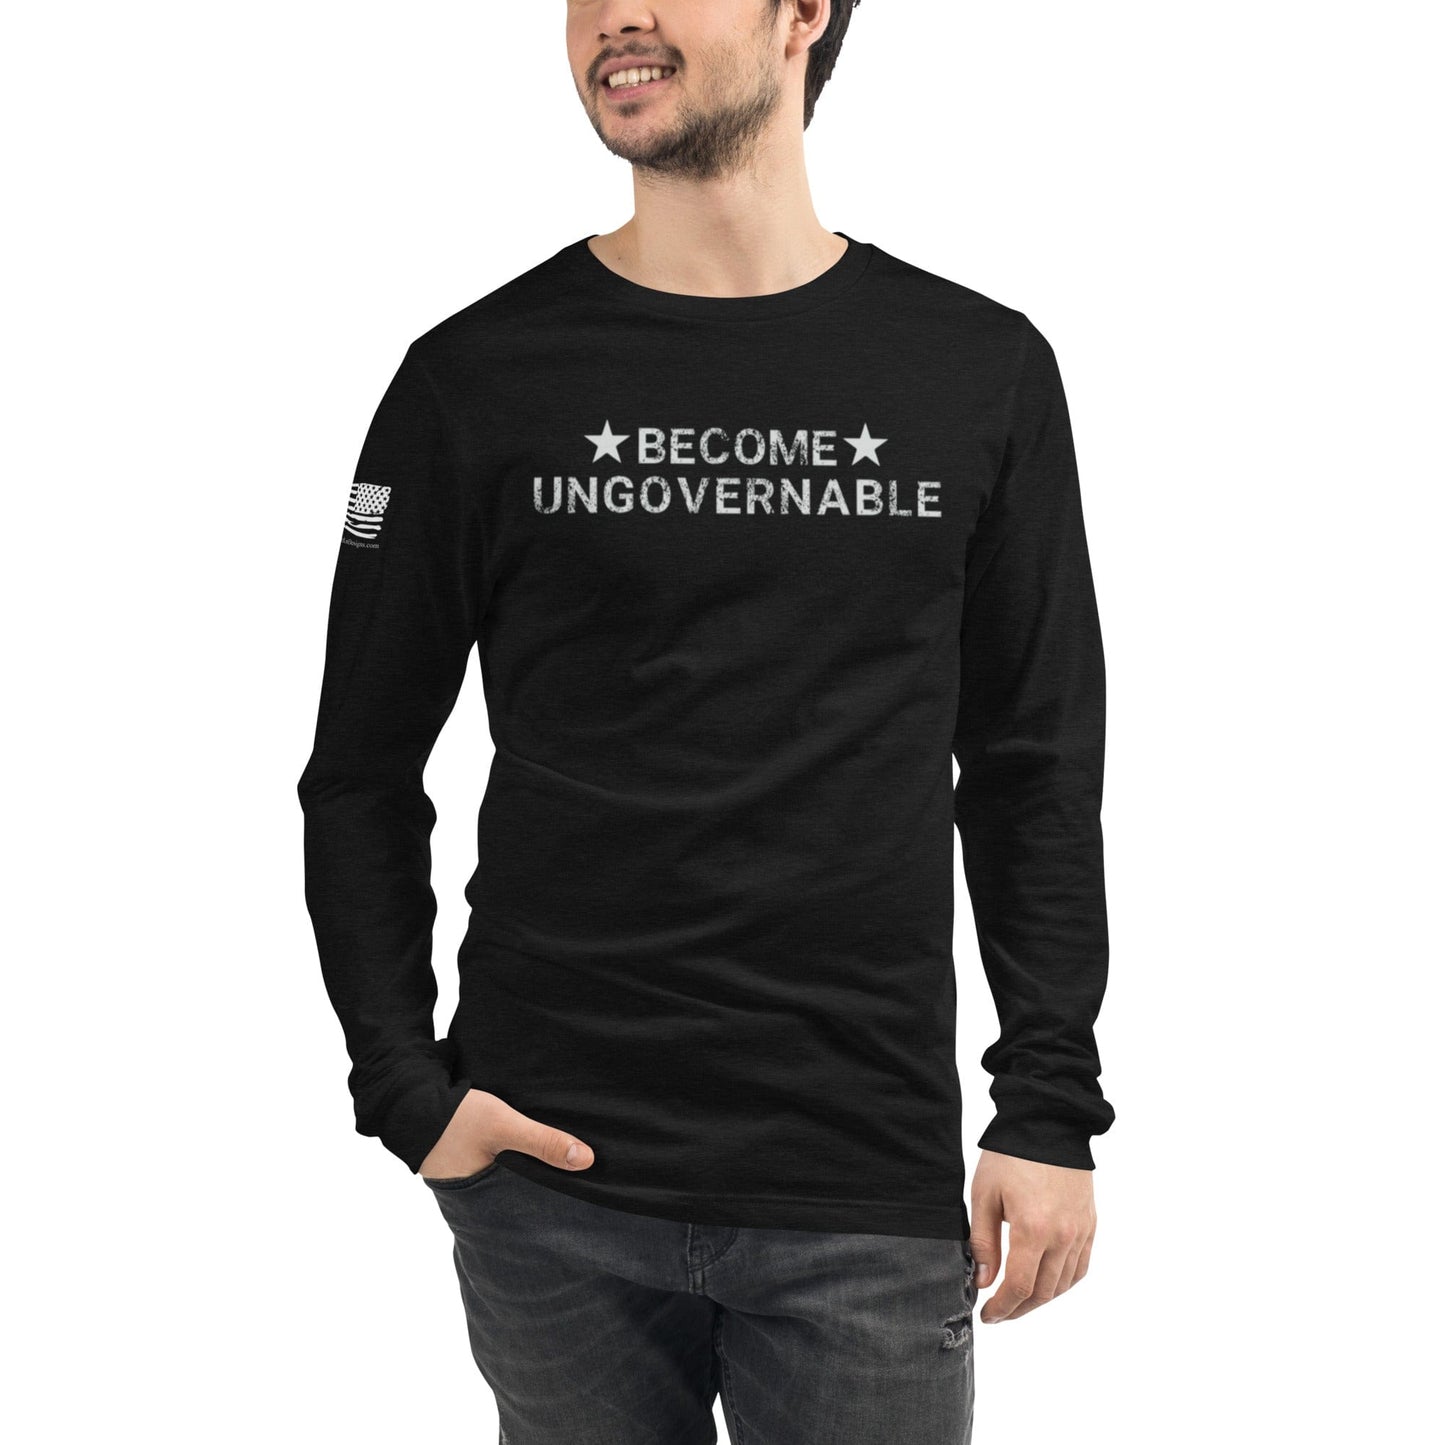 FreedomKat Designs Long Sleeved Shirt Black Heather / S Become Ungovernable Long Sleeve Shirt